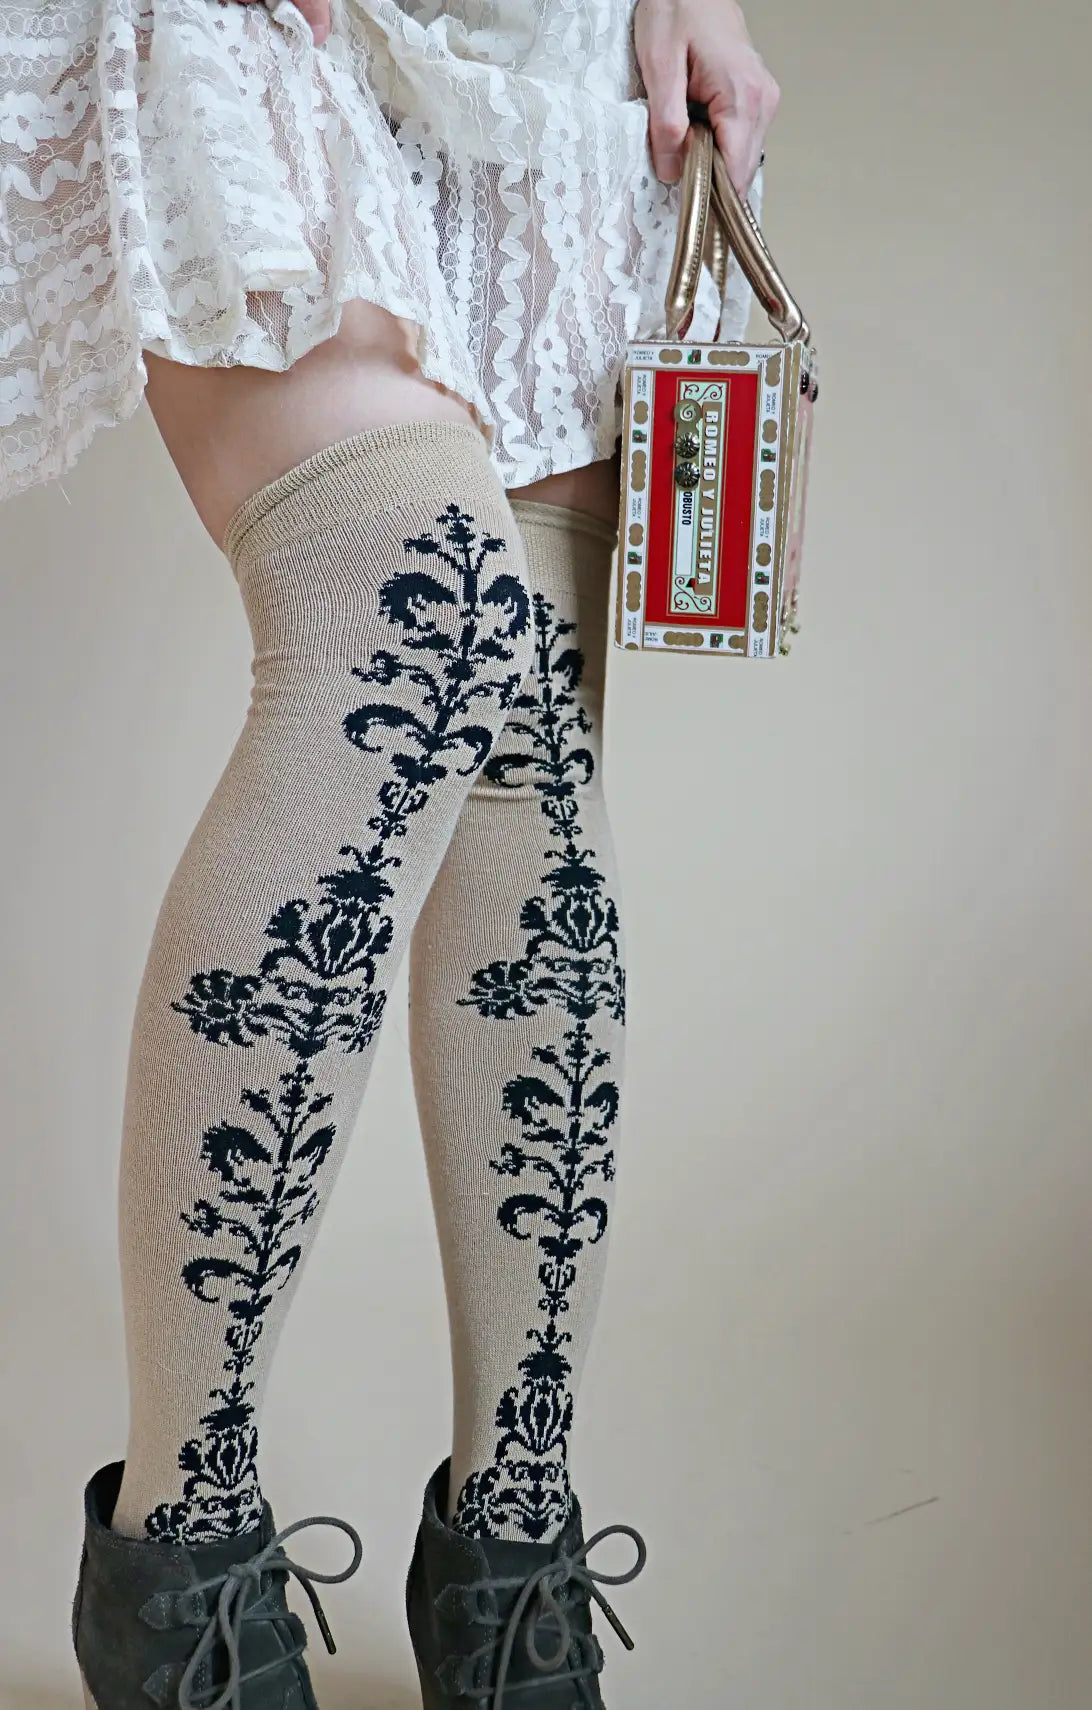 Lower half of a woman wearing TABBISOCKS brand Floral Chain Over The Knee Socks, knee-length socks in beige with a black floral pattern on the front center portion, worn with a white lace skirt and suede shoes